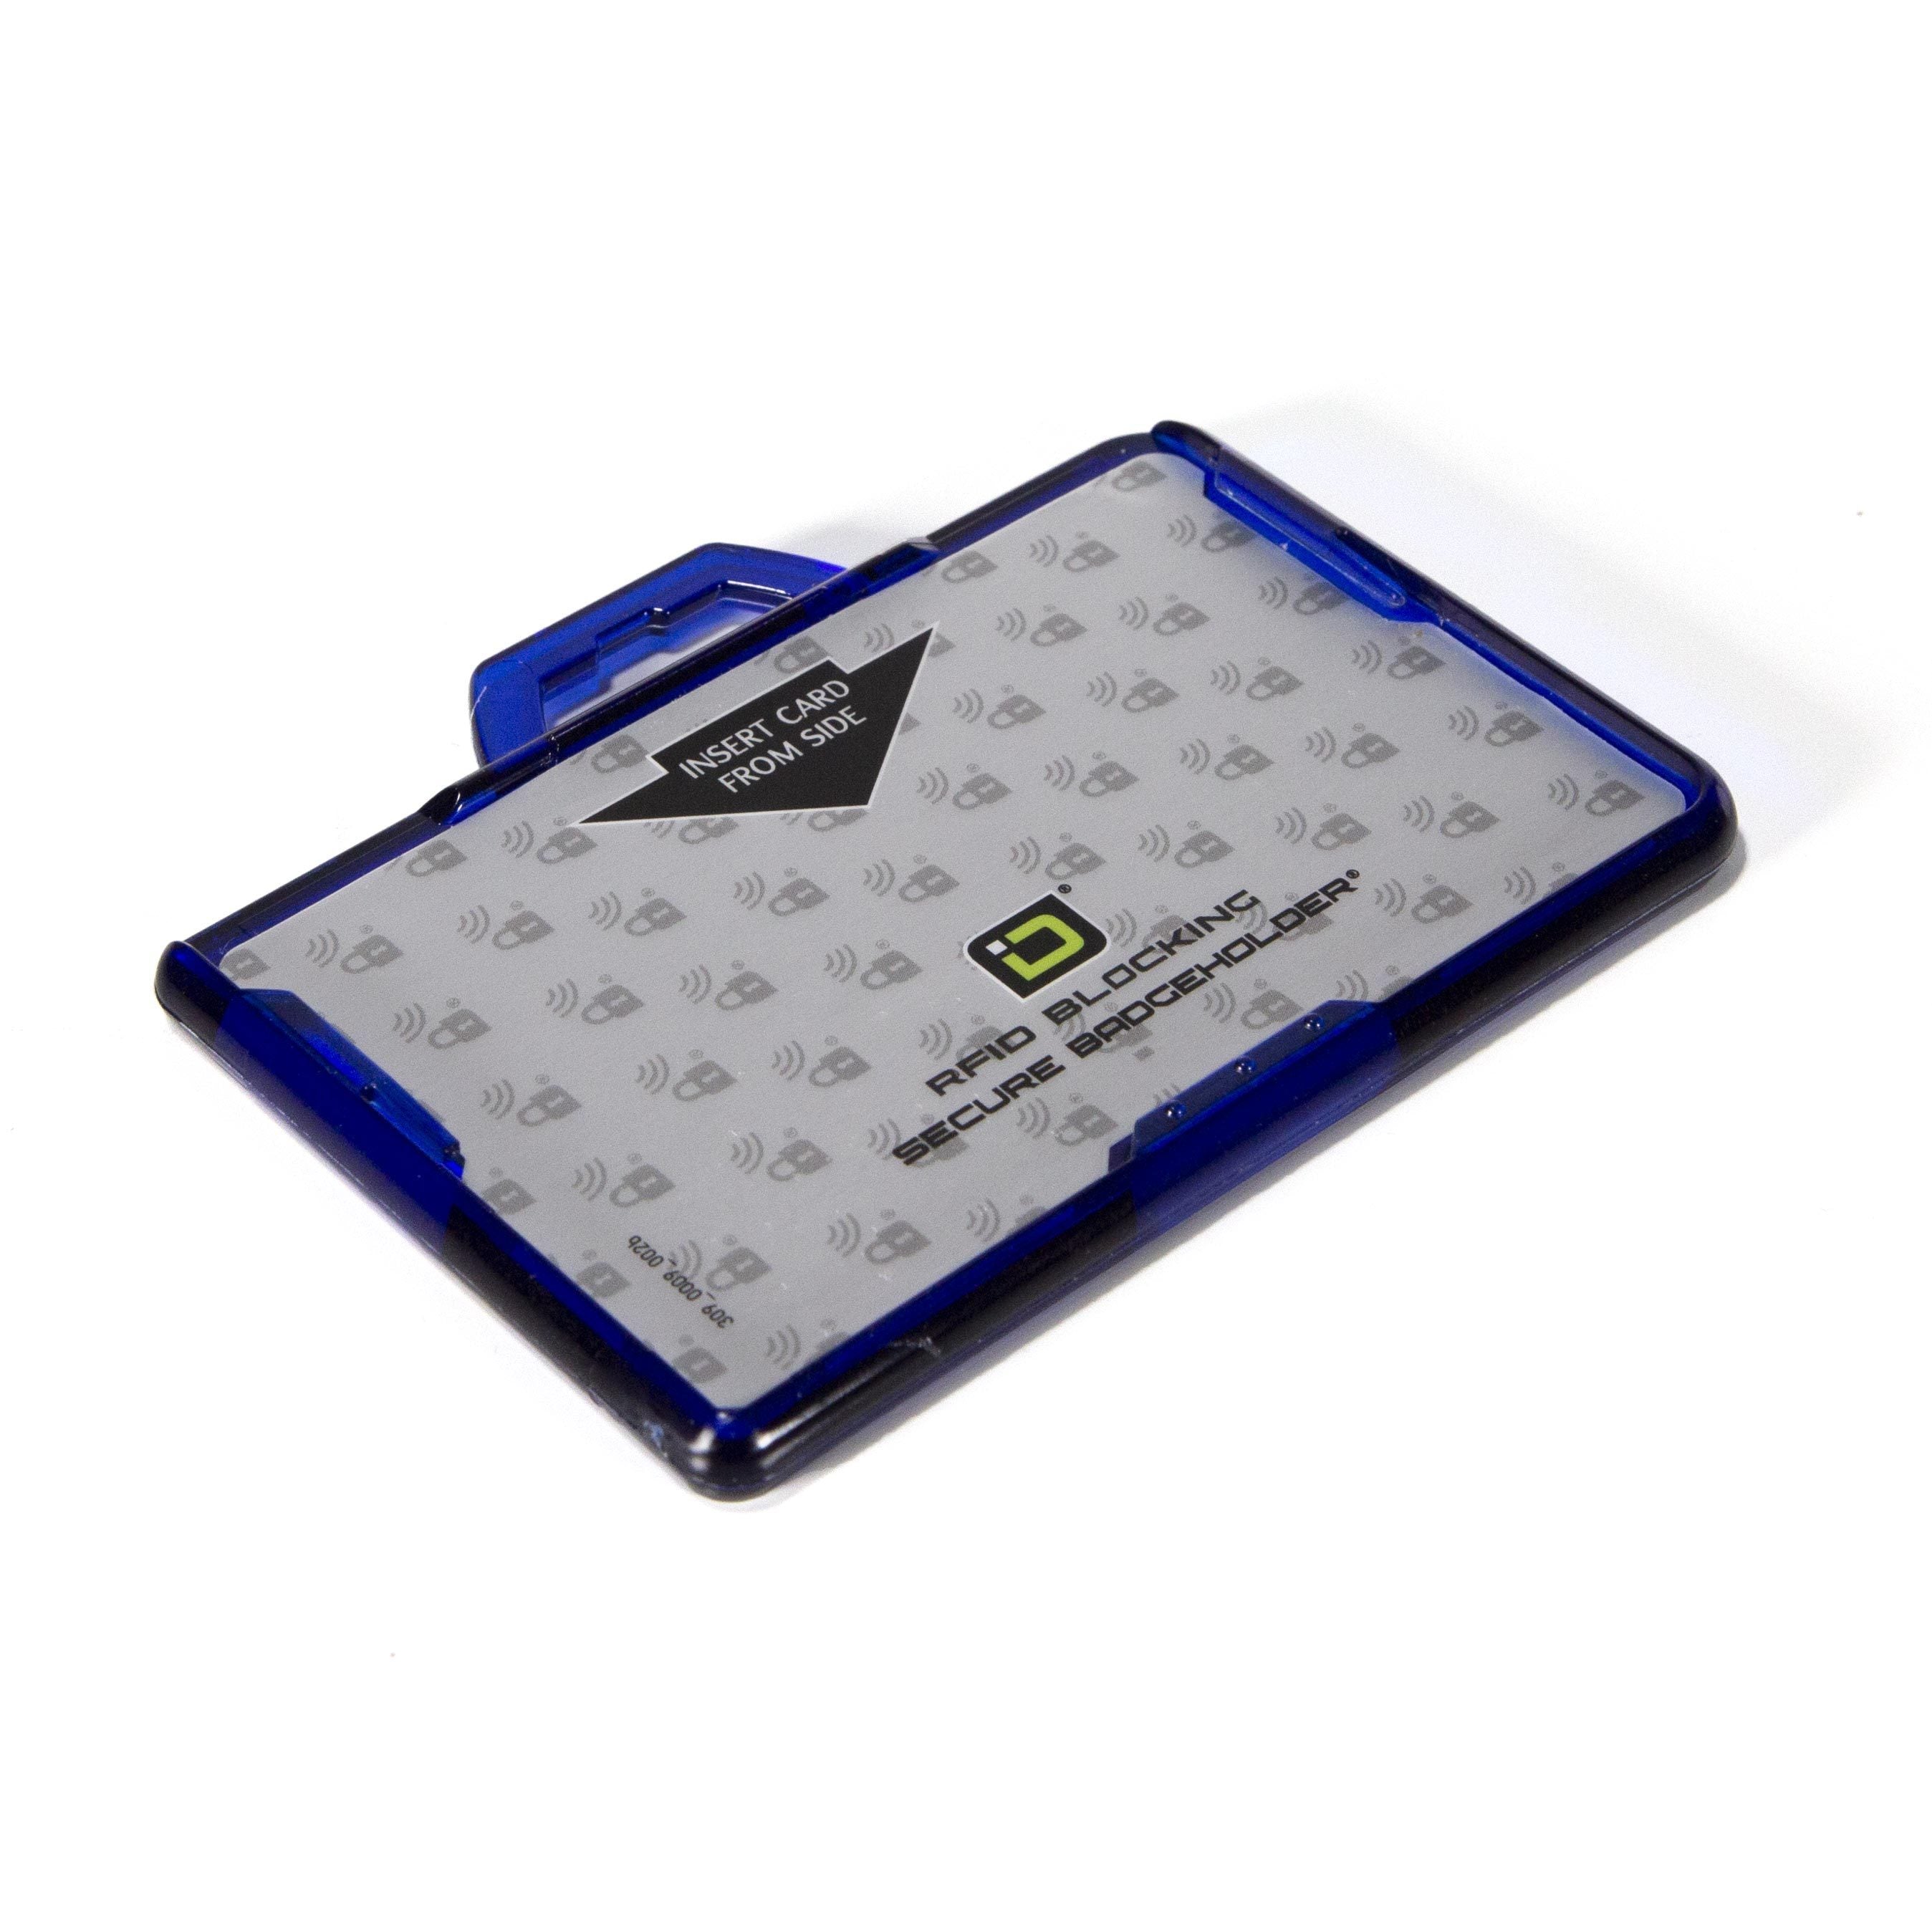 ID Stronghold Badgeholder BloxProx Secure Badge Bolder BloxProx™ Lite LANDSCAPE - Protects 125Khz HID Prox